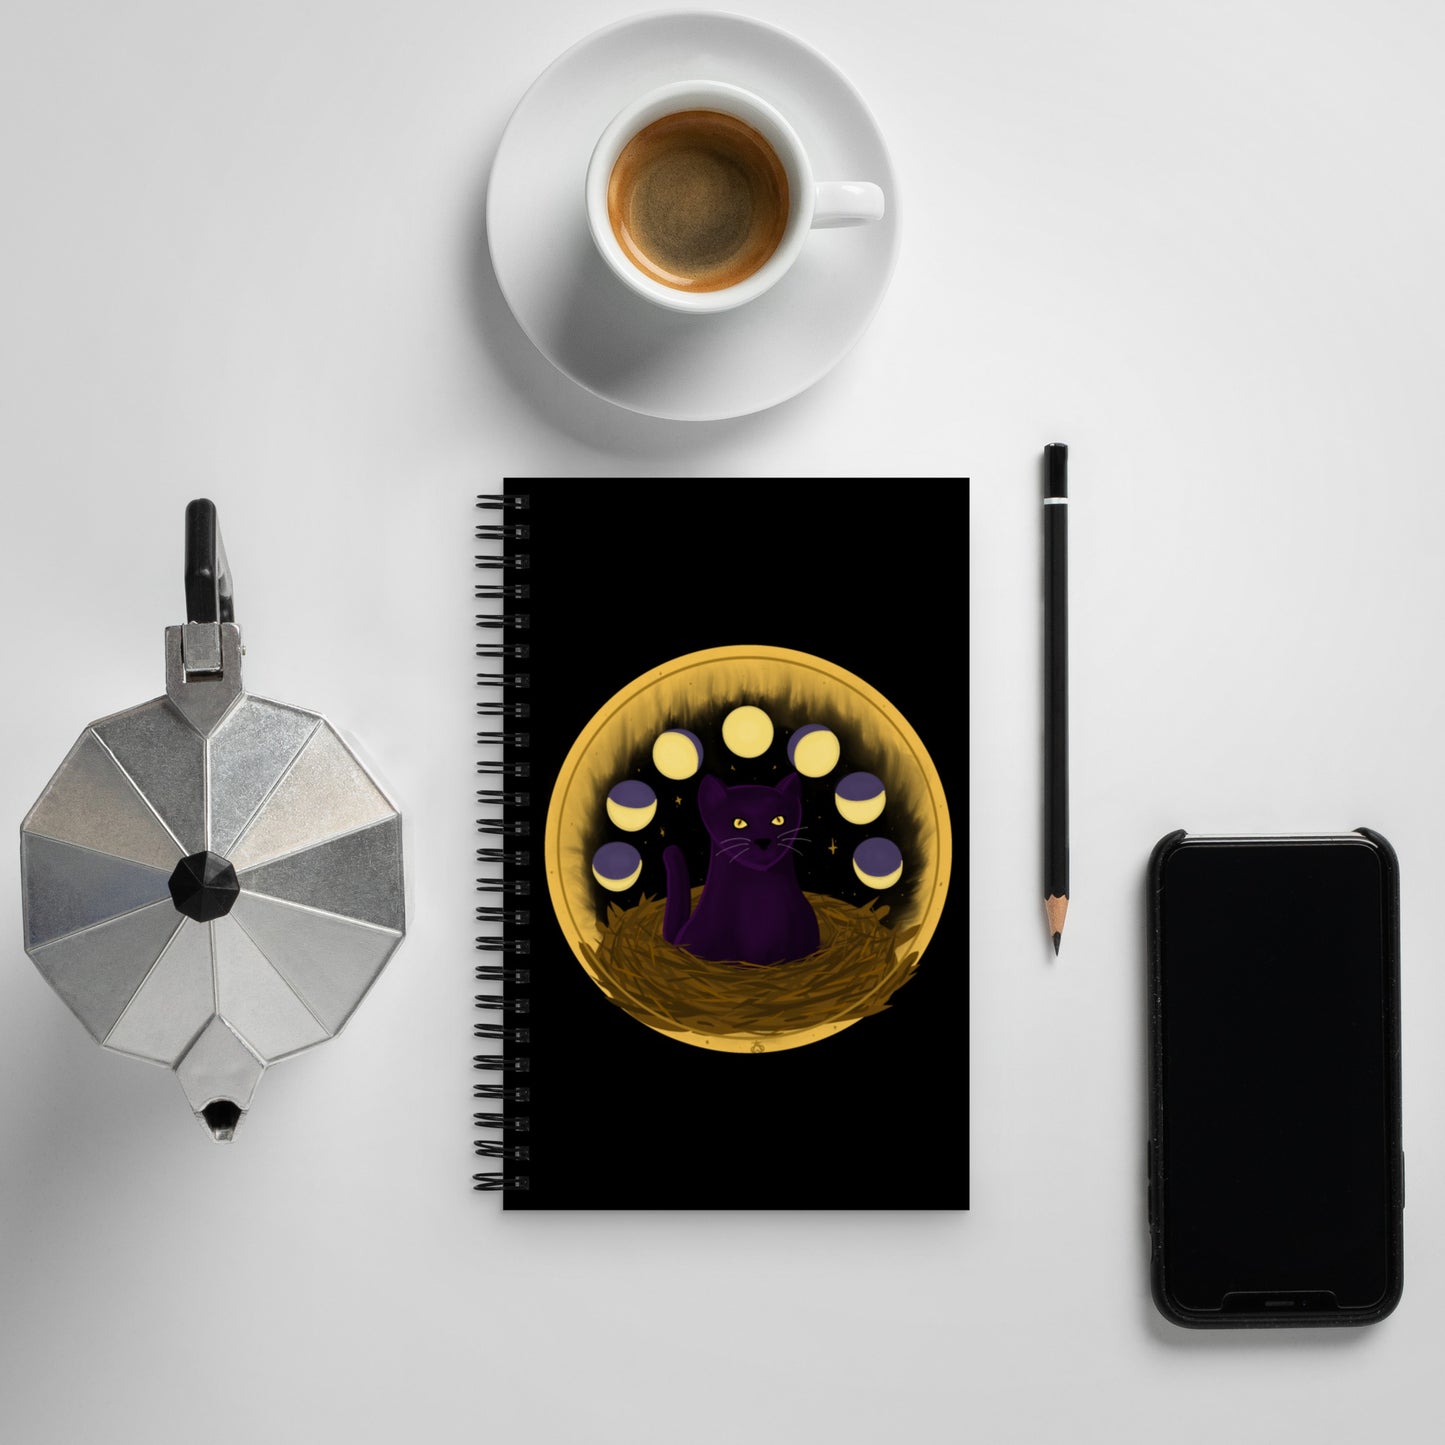 A black notebook with a painting of a dark purple cat with golden eyes sitting in a nest, ringed by the phases of the moon and golden stars behind it.